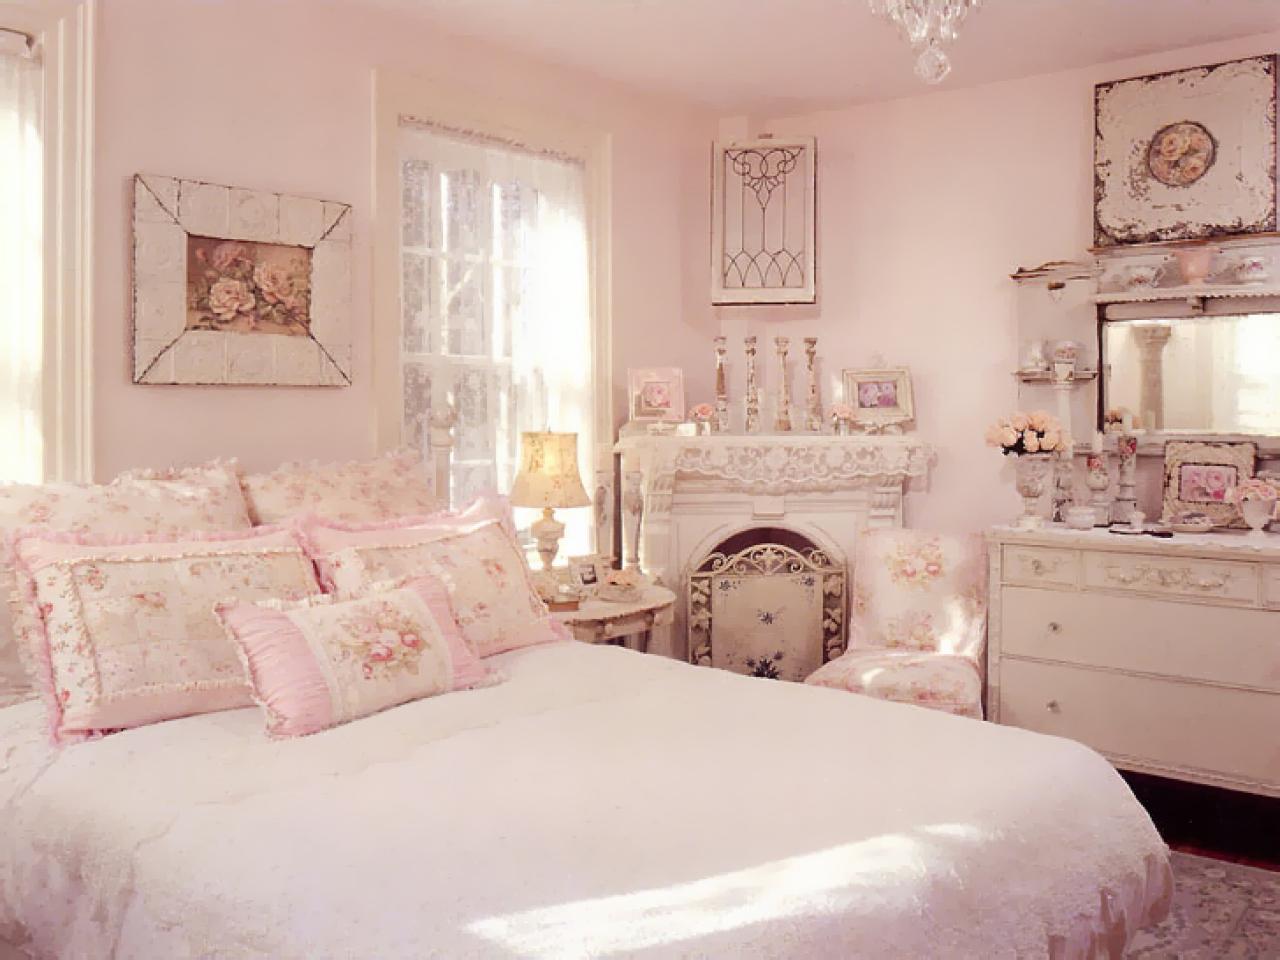 Add Shabby Chic Touches to Your Bedroom Design | Bedrooms & Bedroom ...